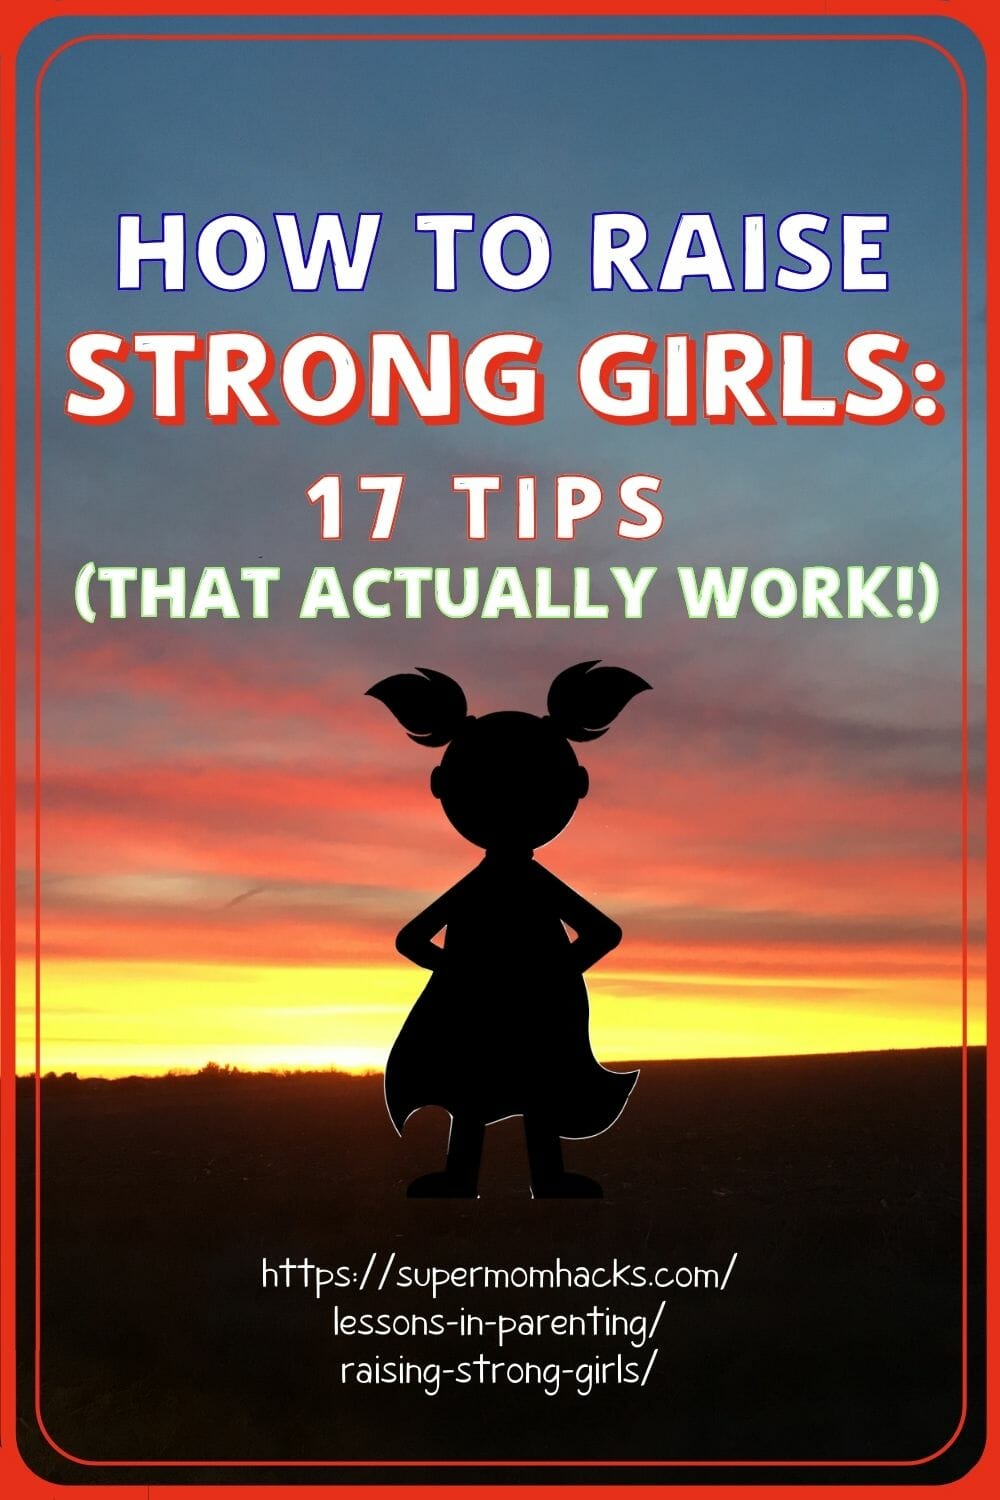 Raising a strong daughter starts early. Help your daughter learn how to be confident with these proven tips for raising strong girls.